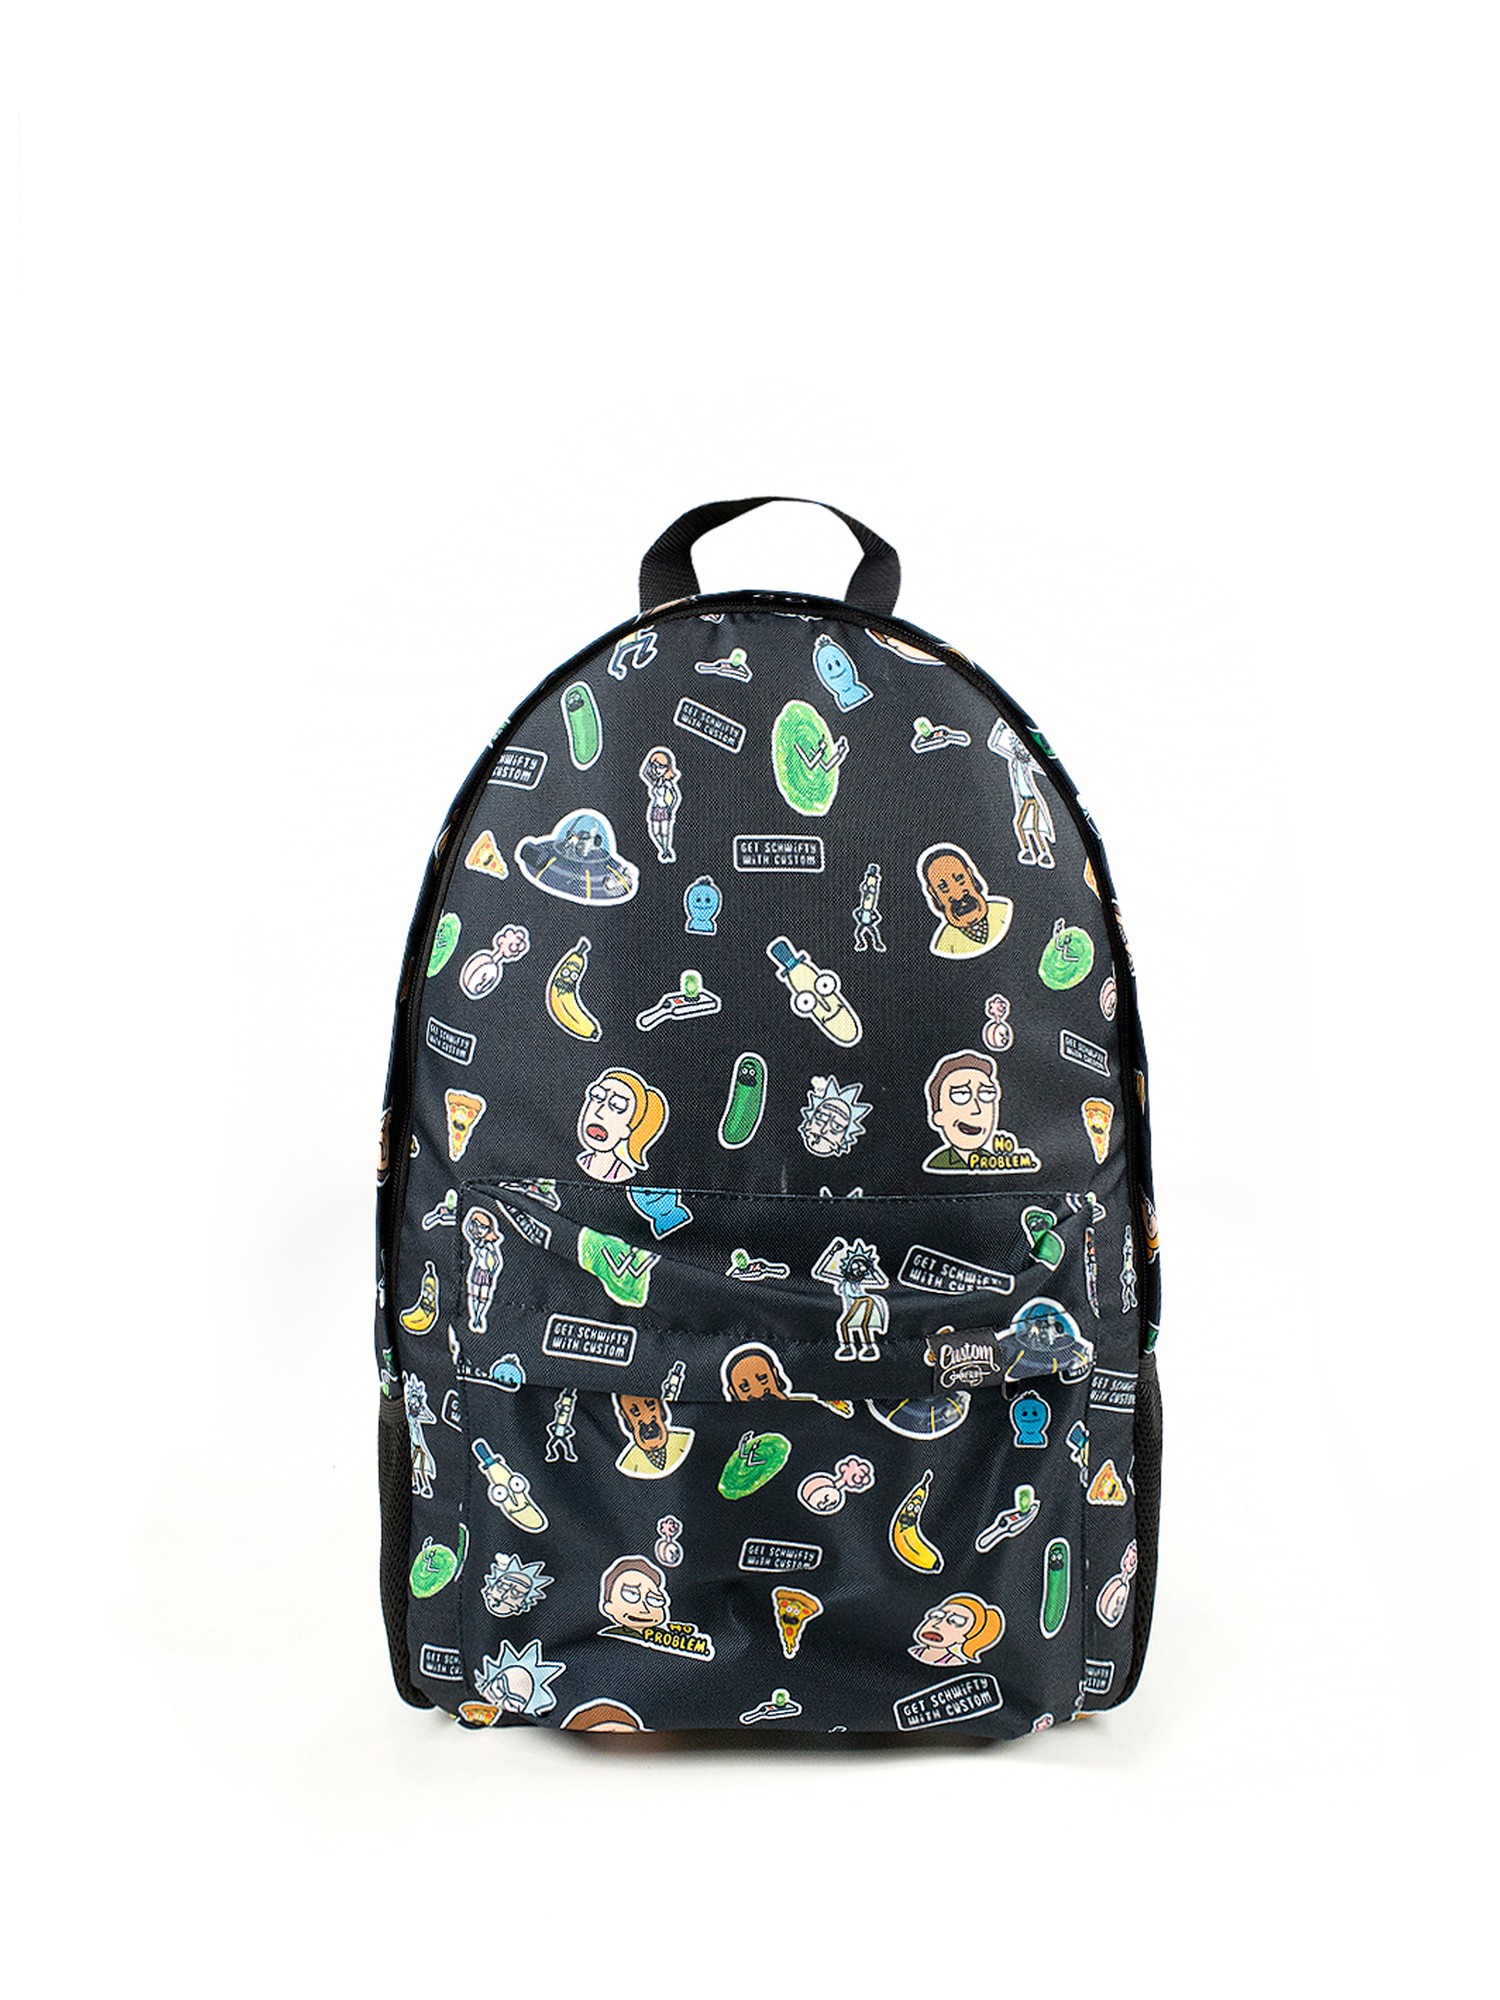 Backpack Duo 2.0 Rick and Morty Black Custom Wear